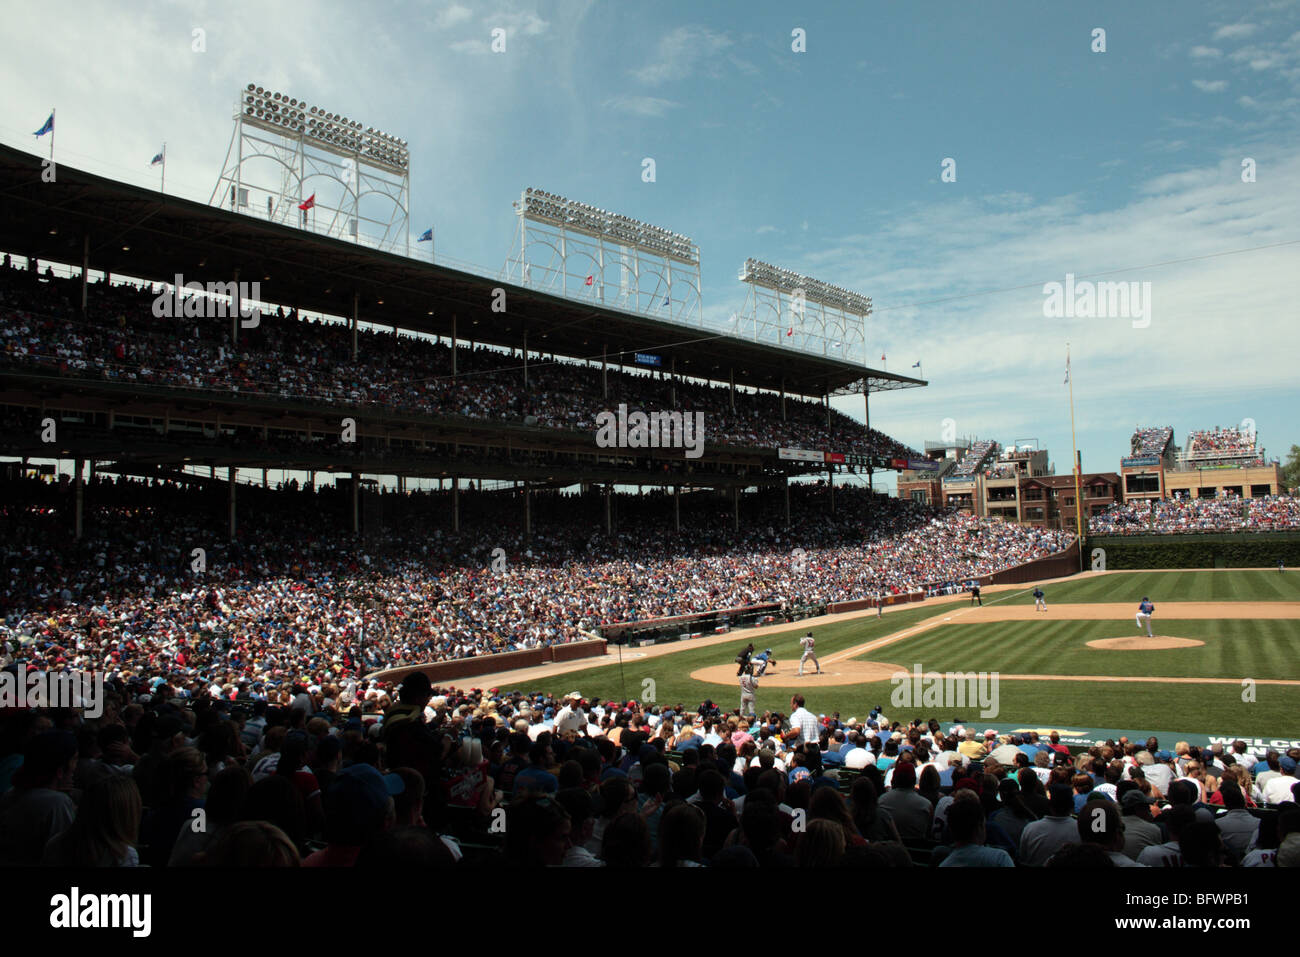 Baseball at Wrigley Field, Chicago, Illinois, USA. The Chicago Cubs pitching against the Saint Louis Cardinals Stock Photo